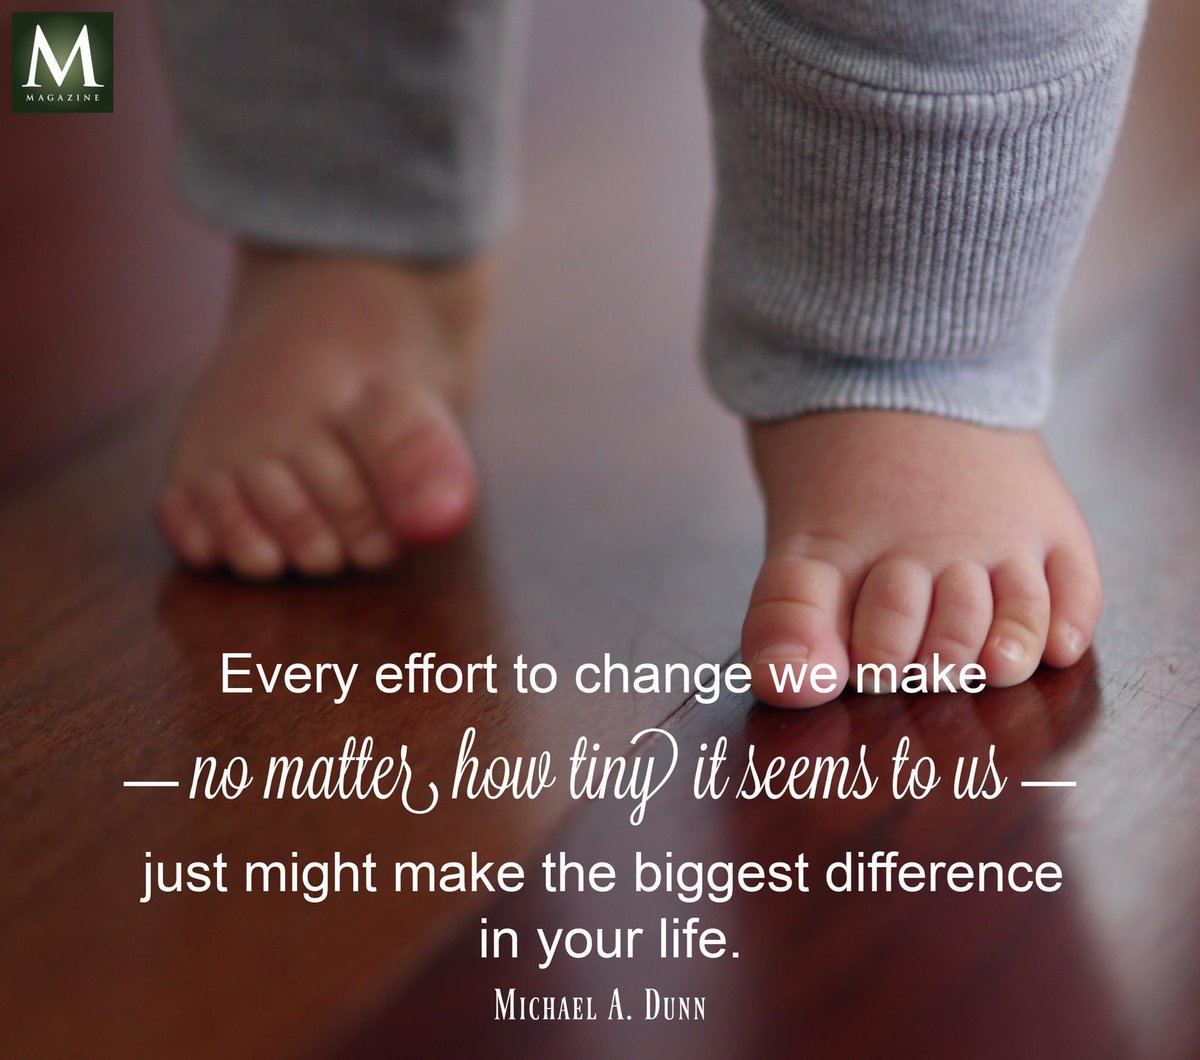 “Every effort to change we make — no matter how tiny it seems to us — just might make the biggest difference in your life.” ~ Elder Michael A. Dunn 

#TrustGod #CountOnHim #HearHim #ComeUntoChrist #ShareGoodness #ChildrenOfGod #GodLovesYou #TheChurchOfJesusChristOfLatterDaySaints